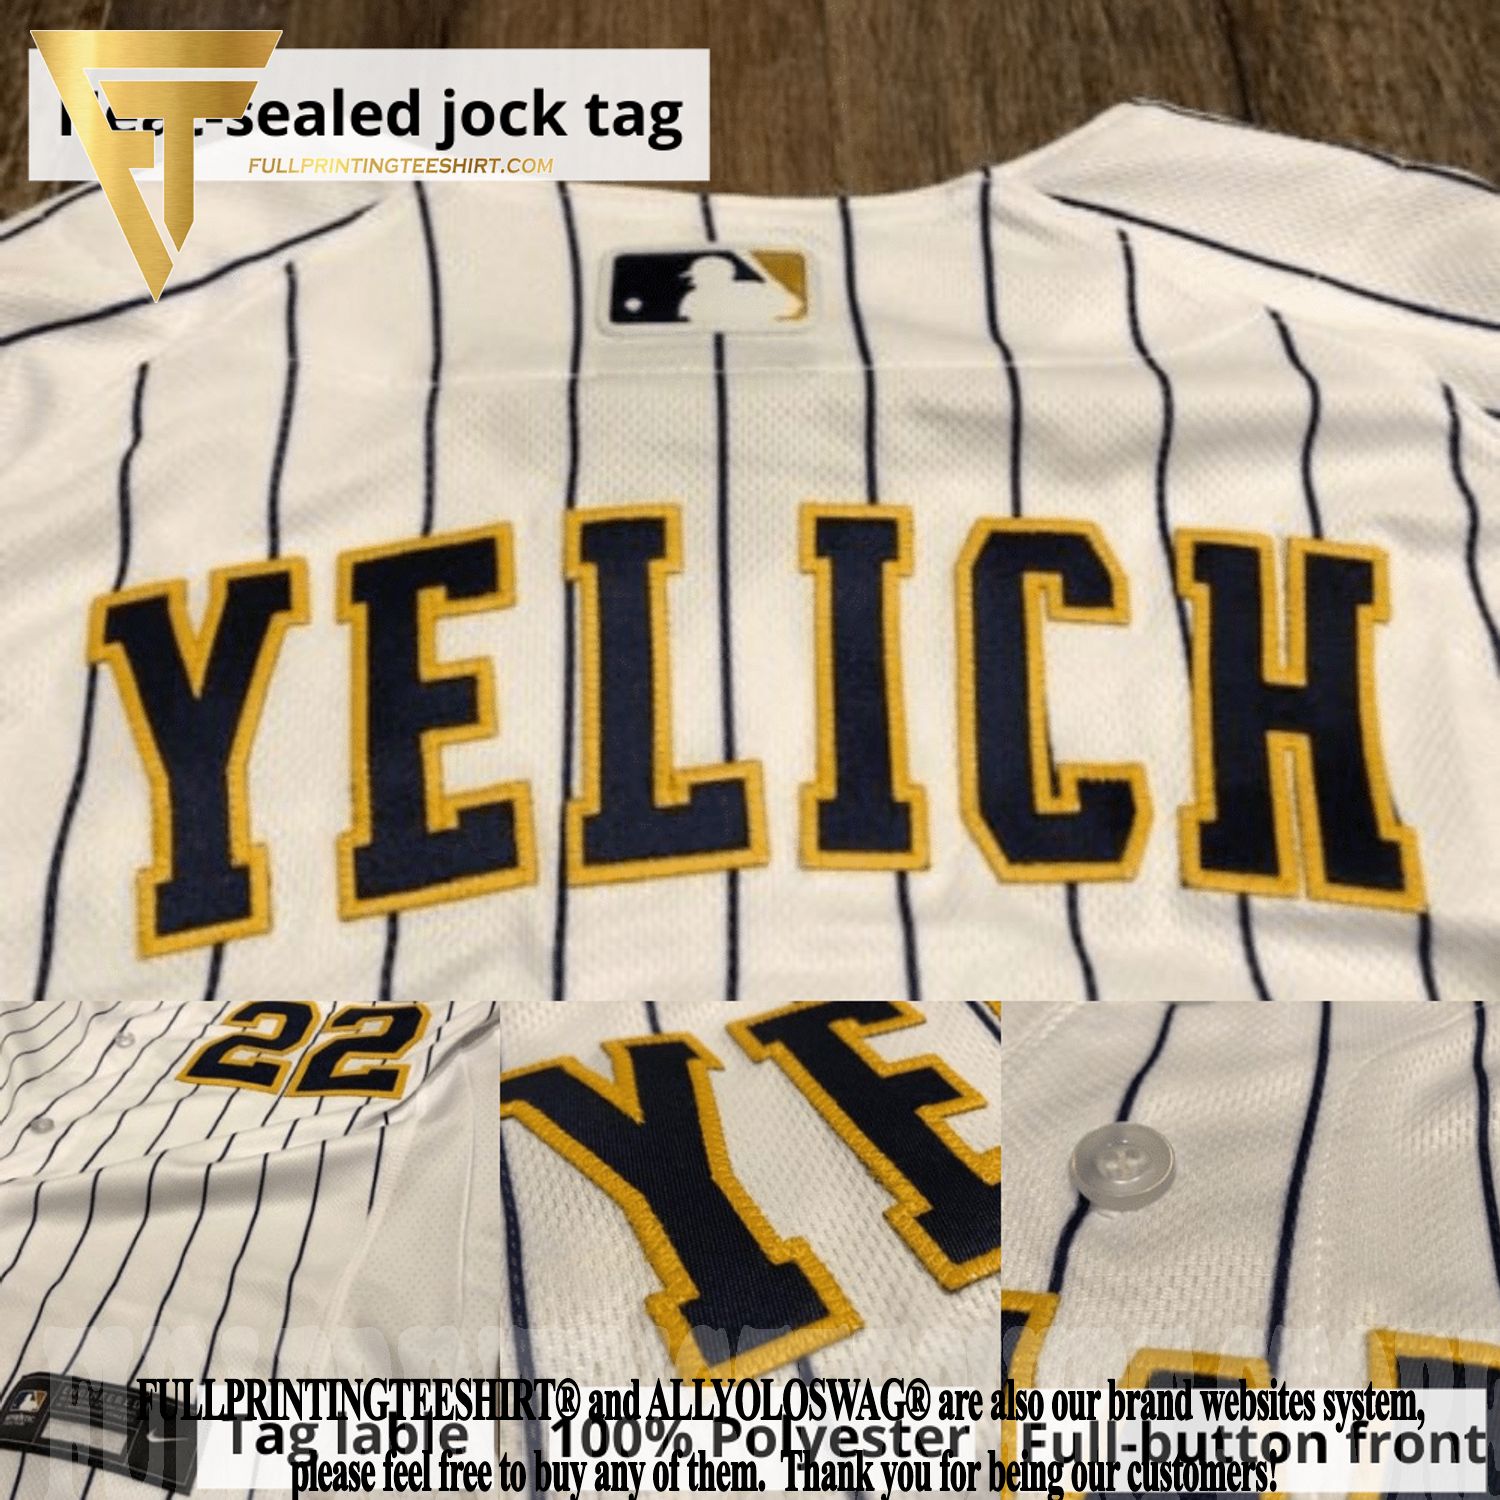 mets all star game jersey